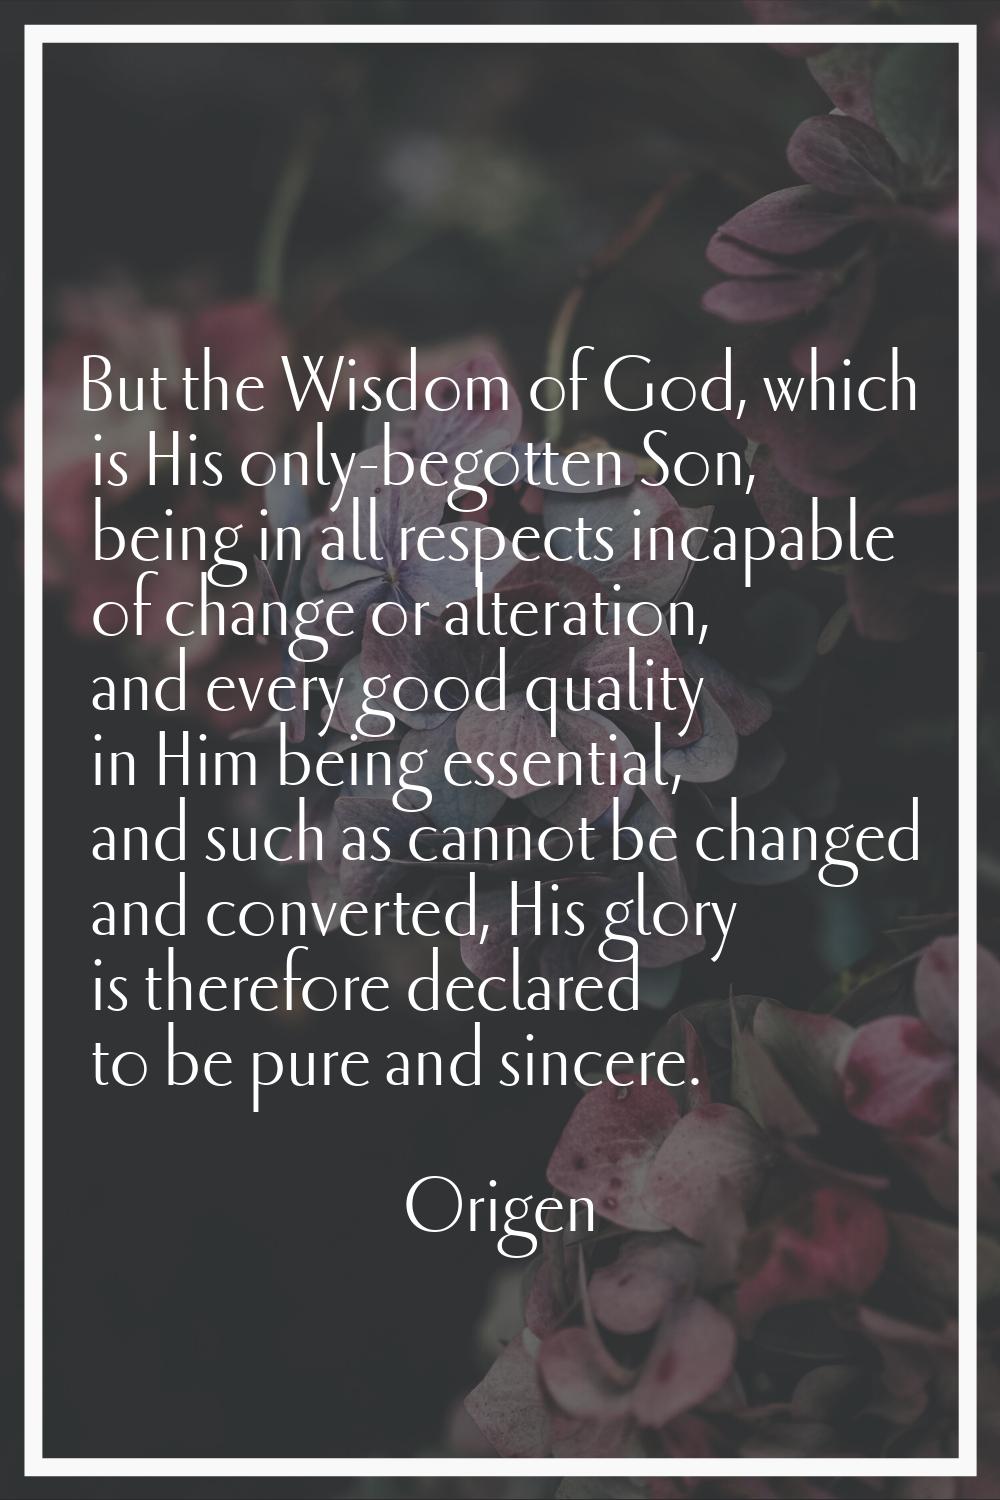 But the Wisdom of God, which is His only-begotten Son, being in all respects incapable of change or